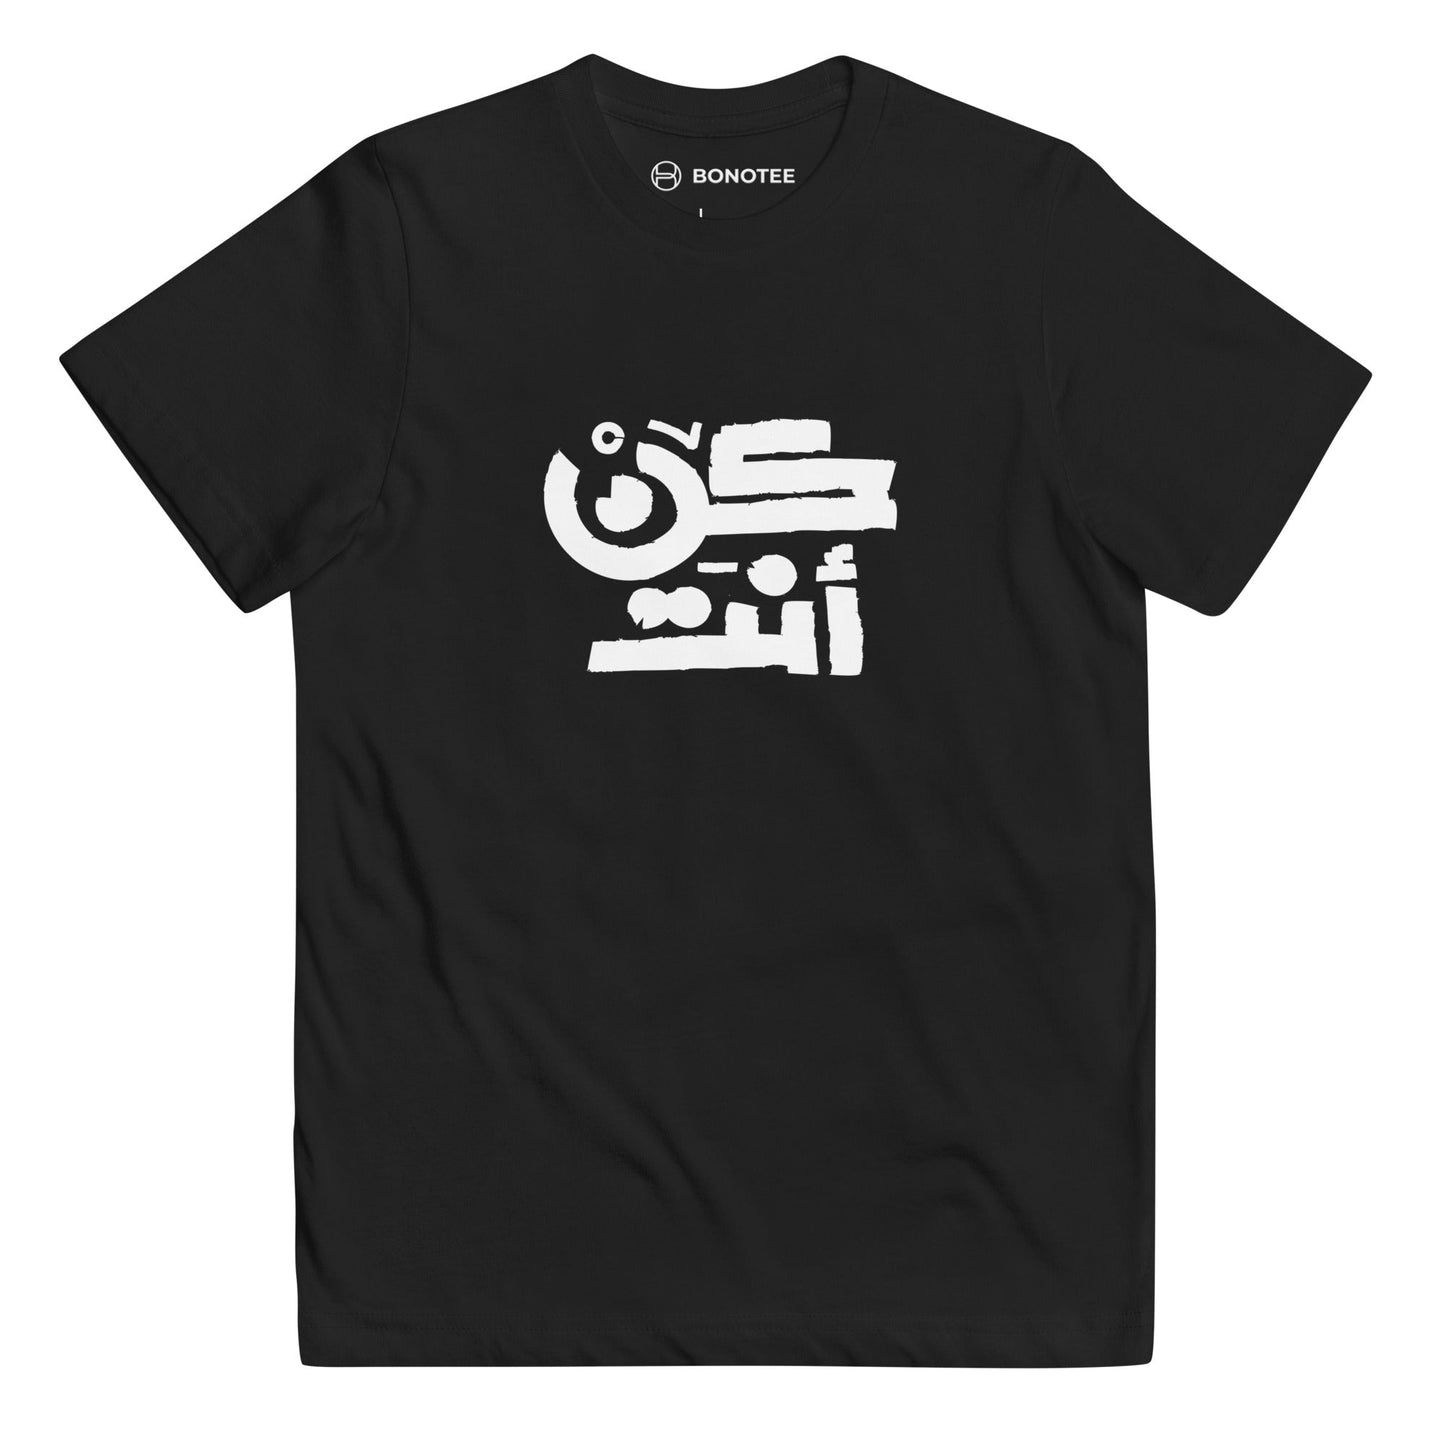 youth-jersey-tshirt-be-yourself-black